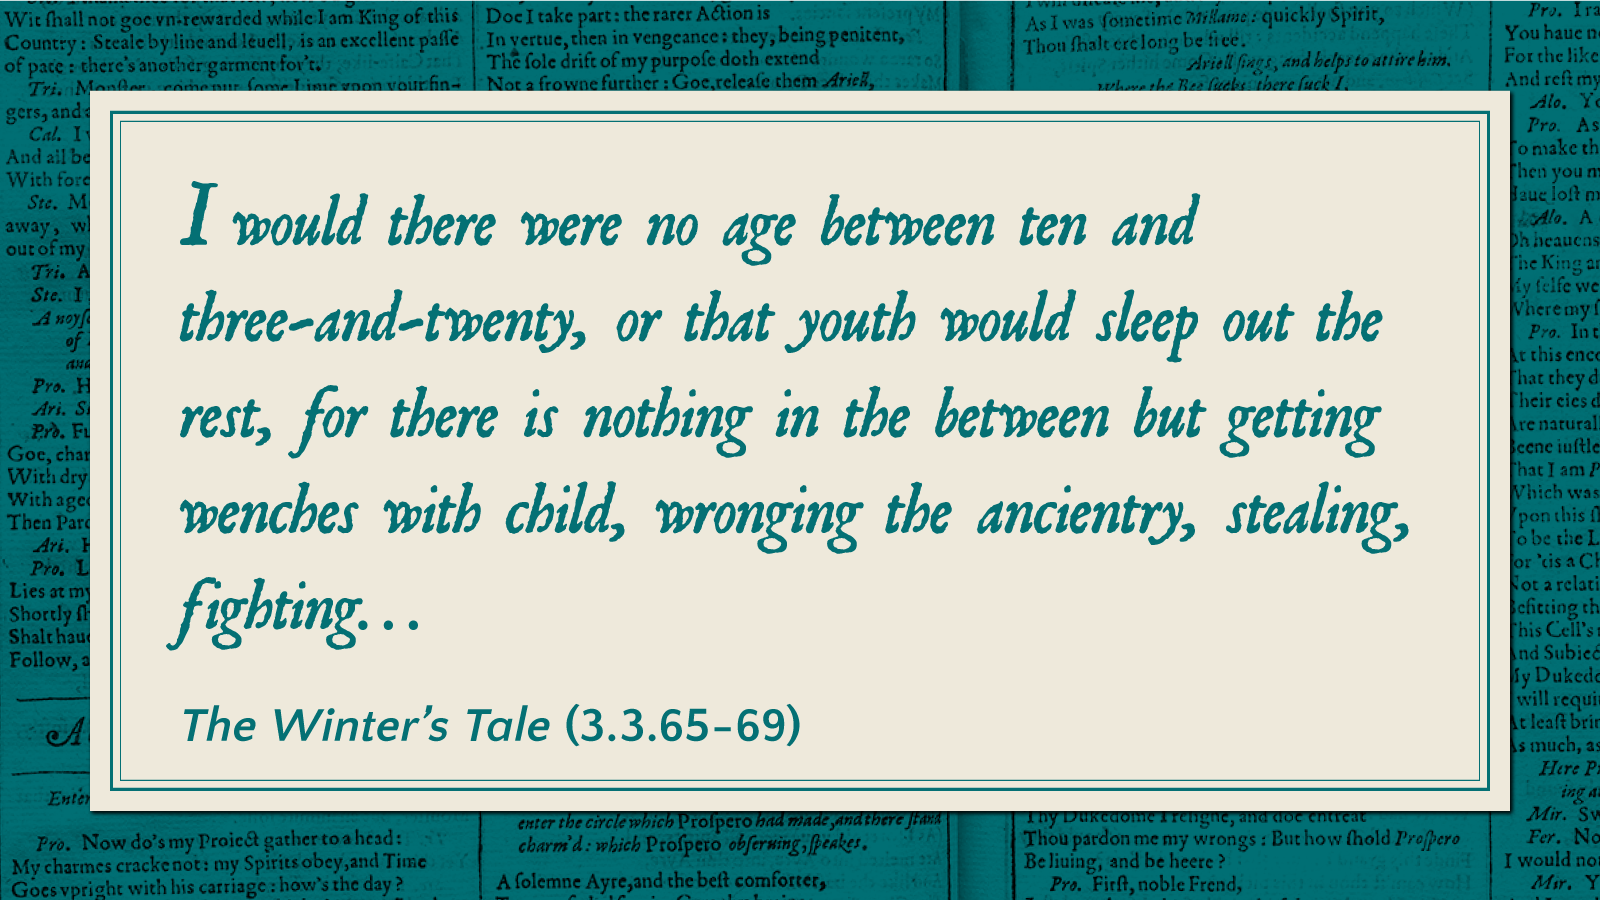 I would there were no age between ten and three-and-twenty, or that youth would sleep out the rest, for there is nothing in the between but getting wenches with child, wronging the ancientry, stealing, fighting... -The Winter's Tale (3.3.65-69)